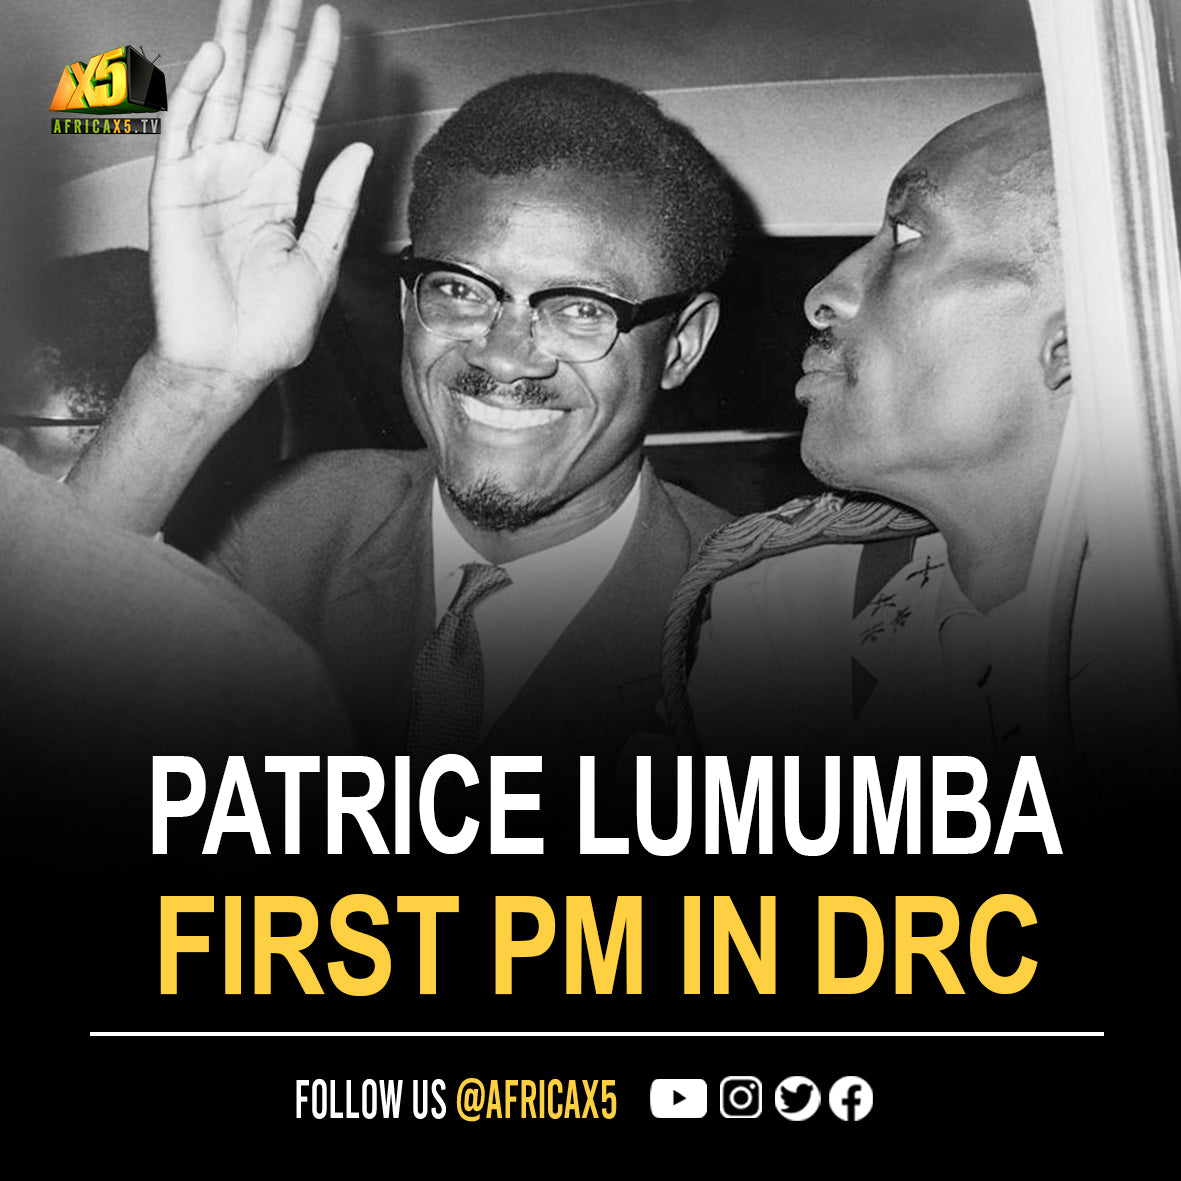 The late Patrice Lumumba was the first legally elected prime minister of D.R Congo. He was assassinated in 1961 following a military coup supported by U.S.A & Belgian imperialism which was admitted by US State Dept in 2013 authorized by president Eisenhow